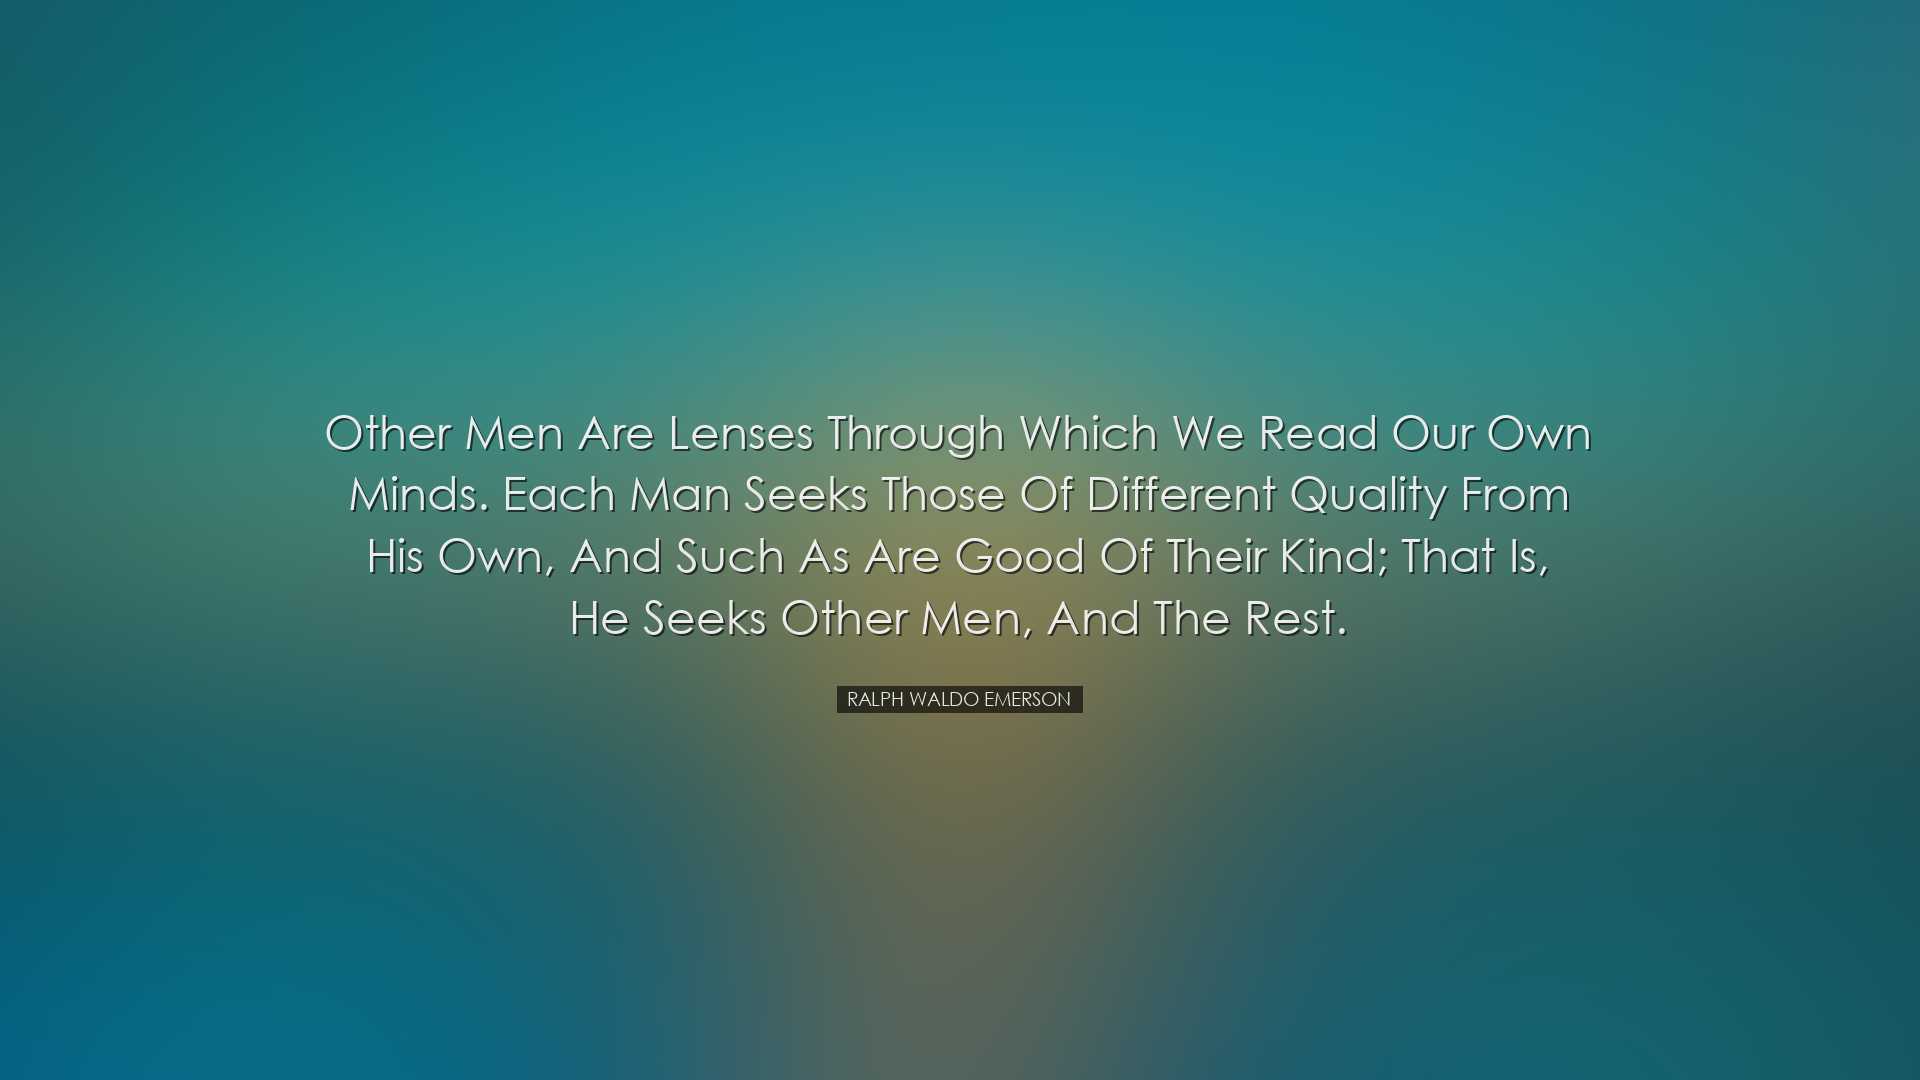 Other men are lenses through which we read our own minds. Each man